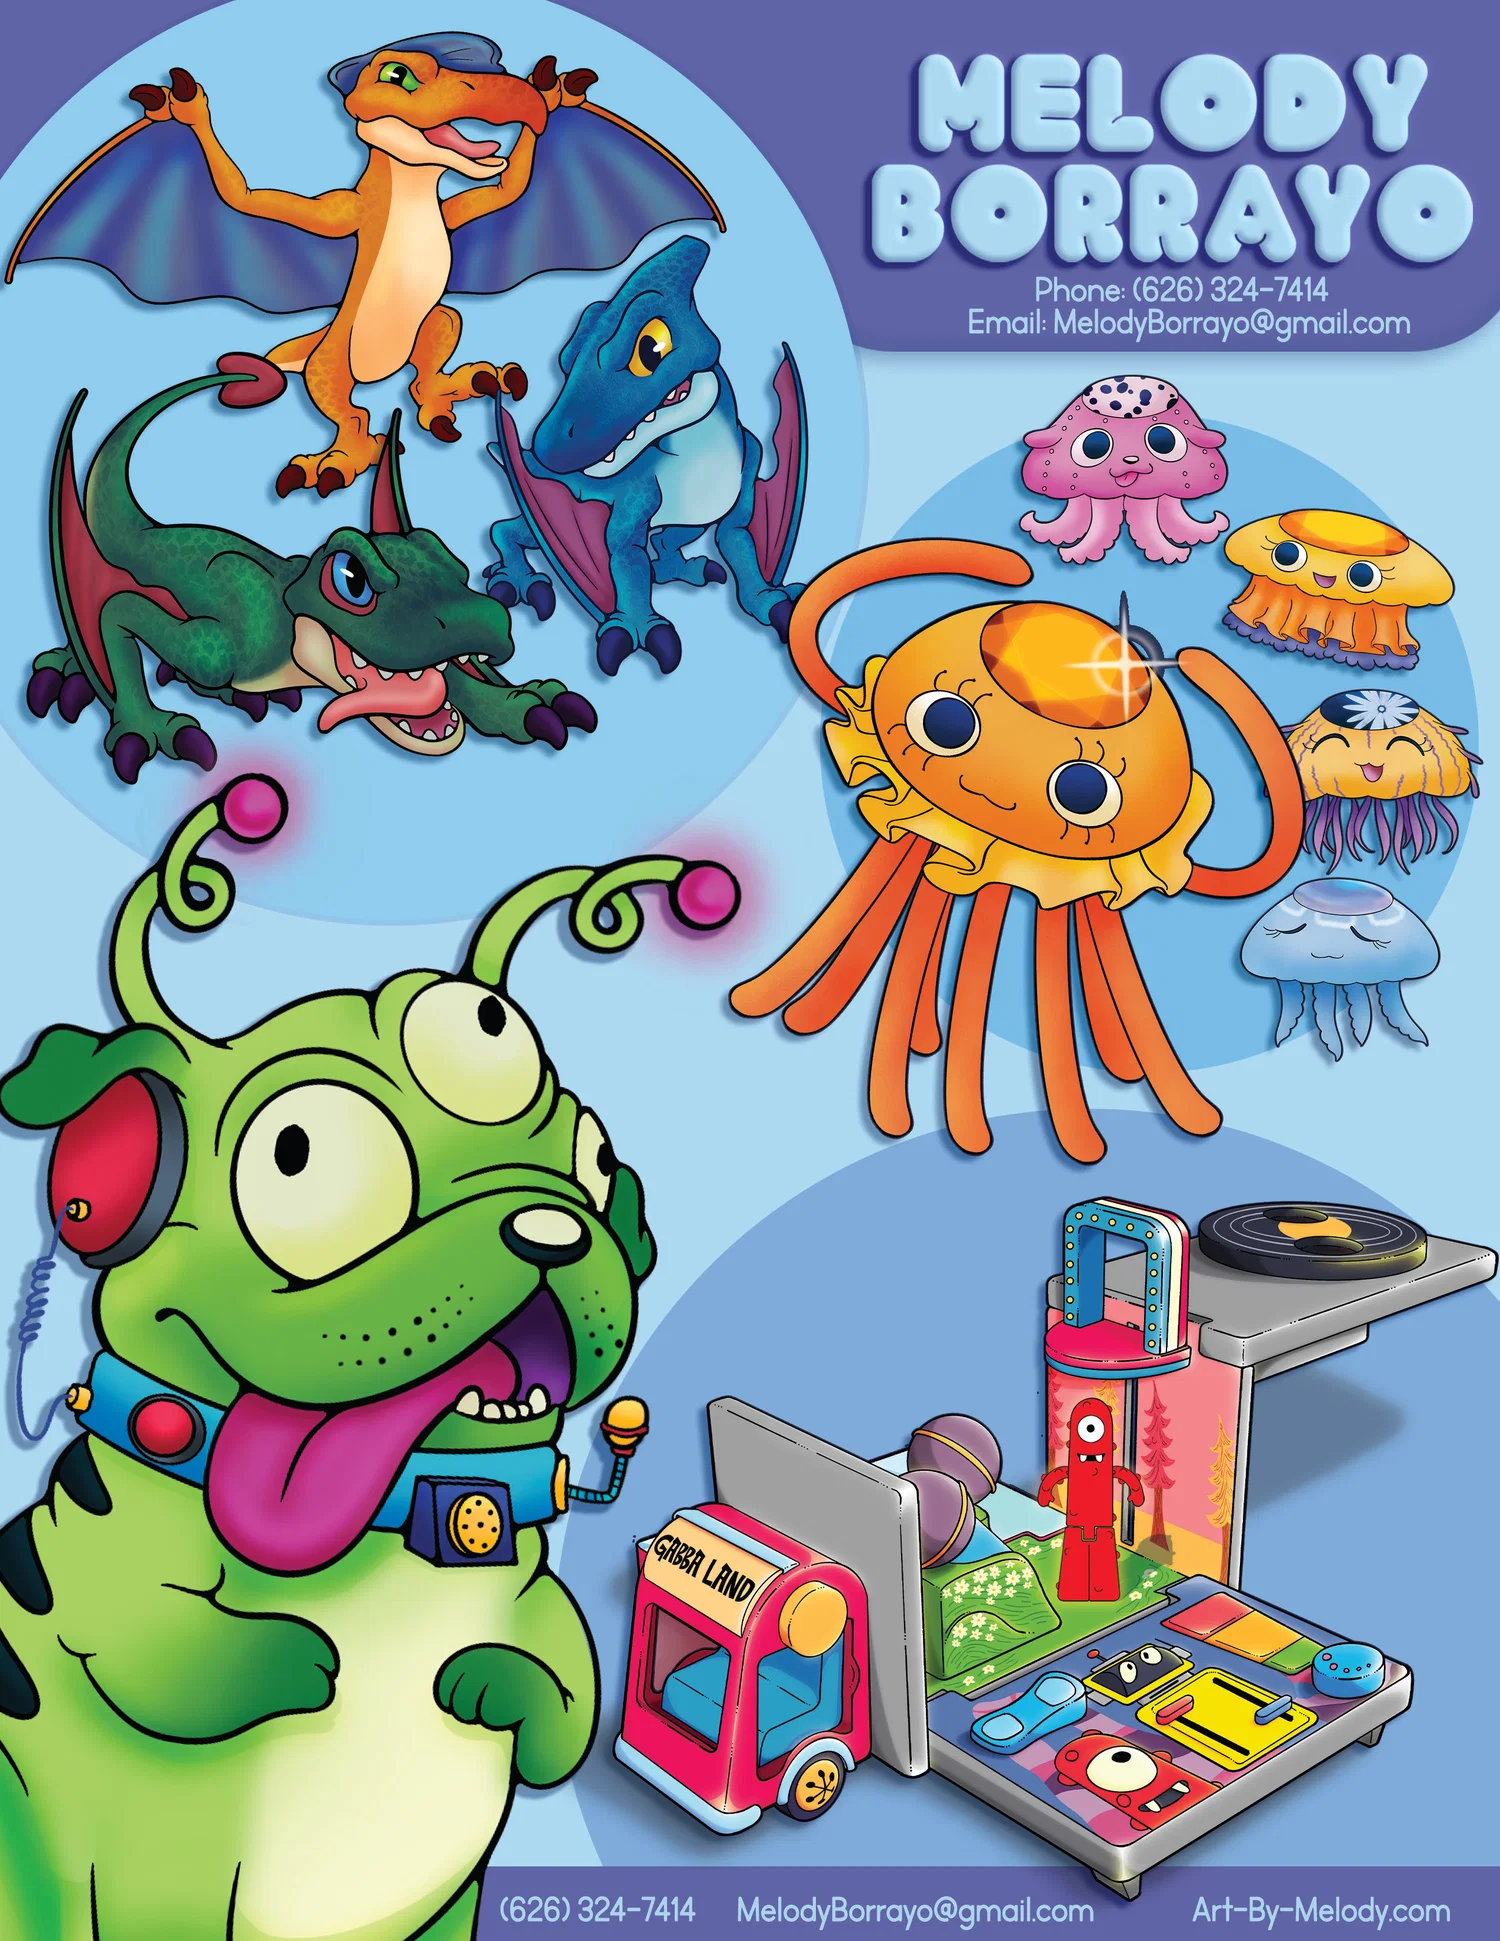 Promotional Sheet displaying various toy concepts and projects